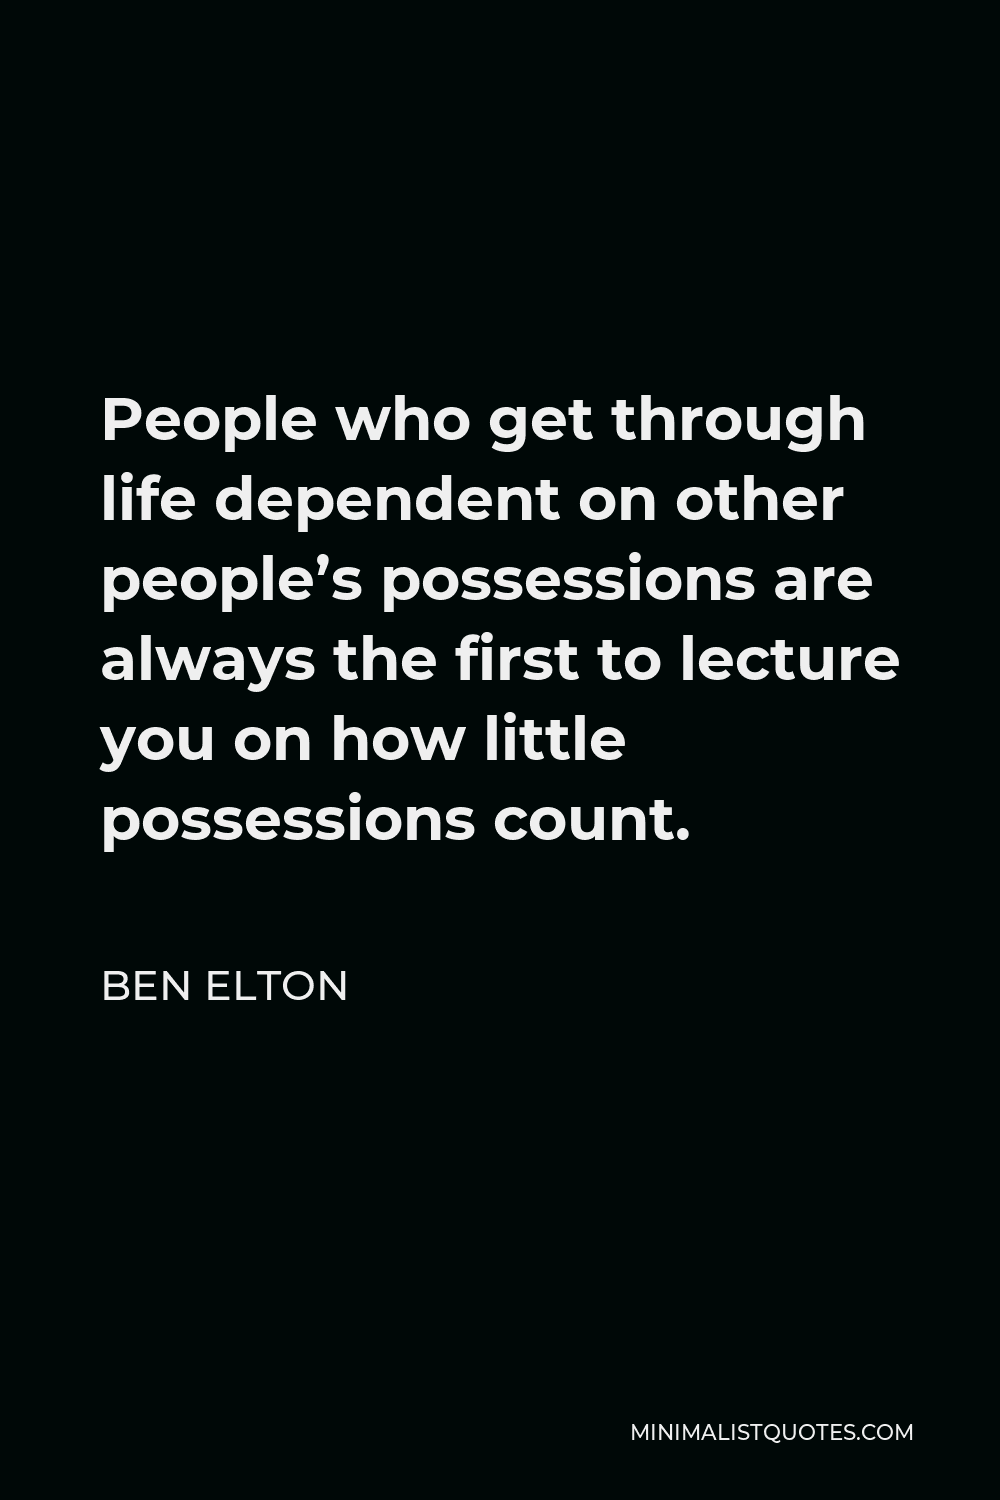 Ben Elton Quote - People who get through life dependent on other people’s possessions are always the first to lecture you on how little possessions count.